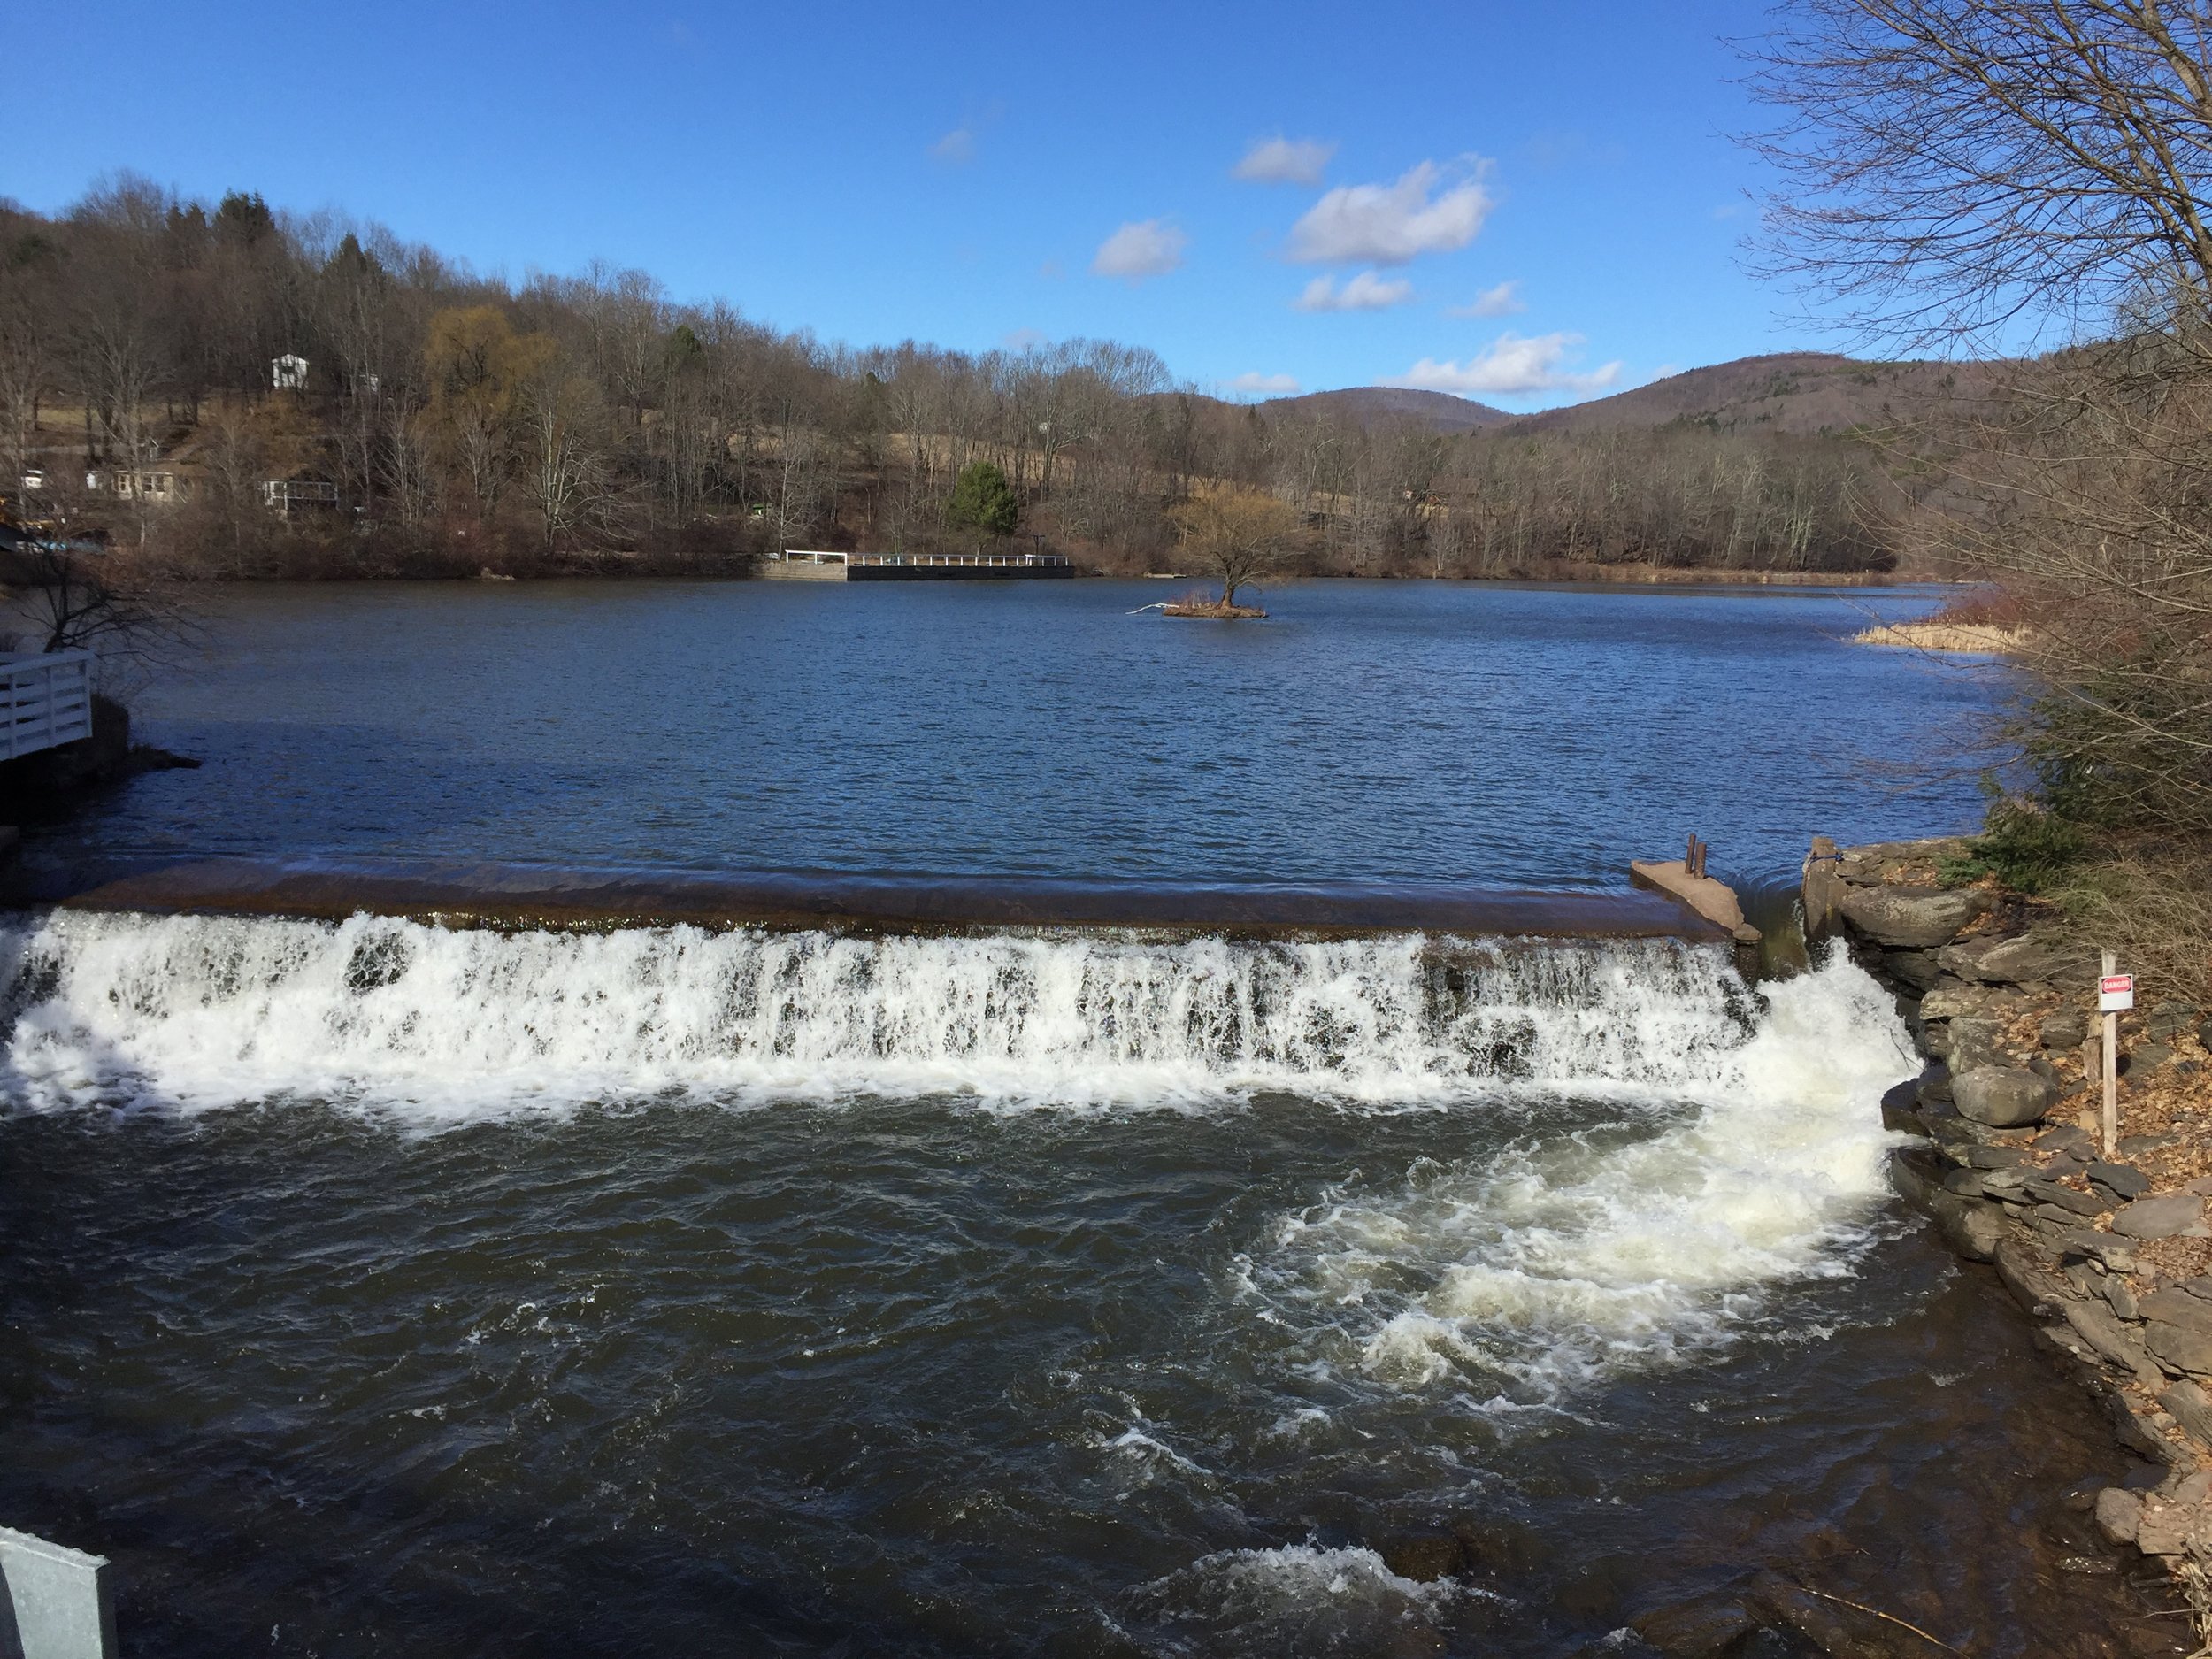 Coalition for the Delaware River Watershed — Trees for Trout: Ashokan- Pepacton Trout Unlimited Improves Habitat for Delaware River Fish